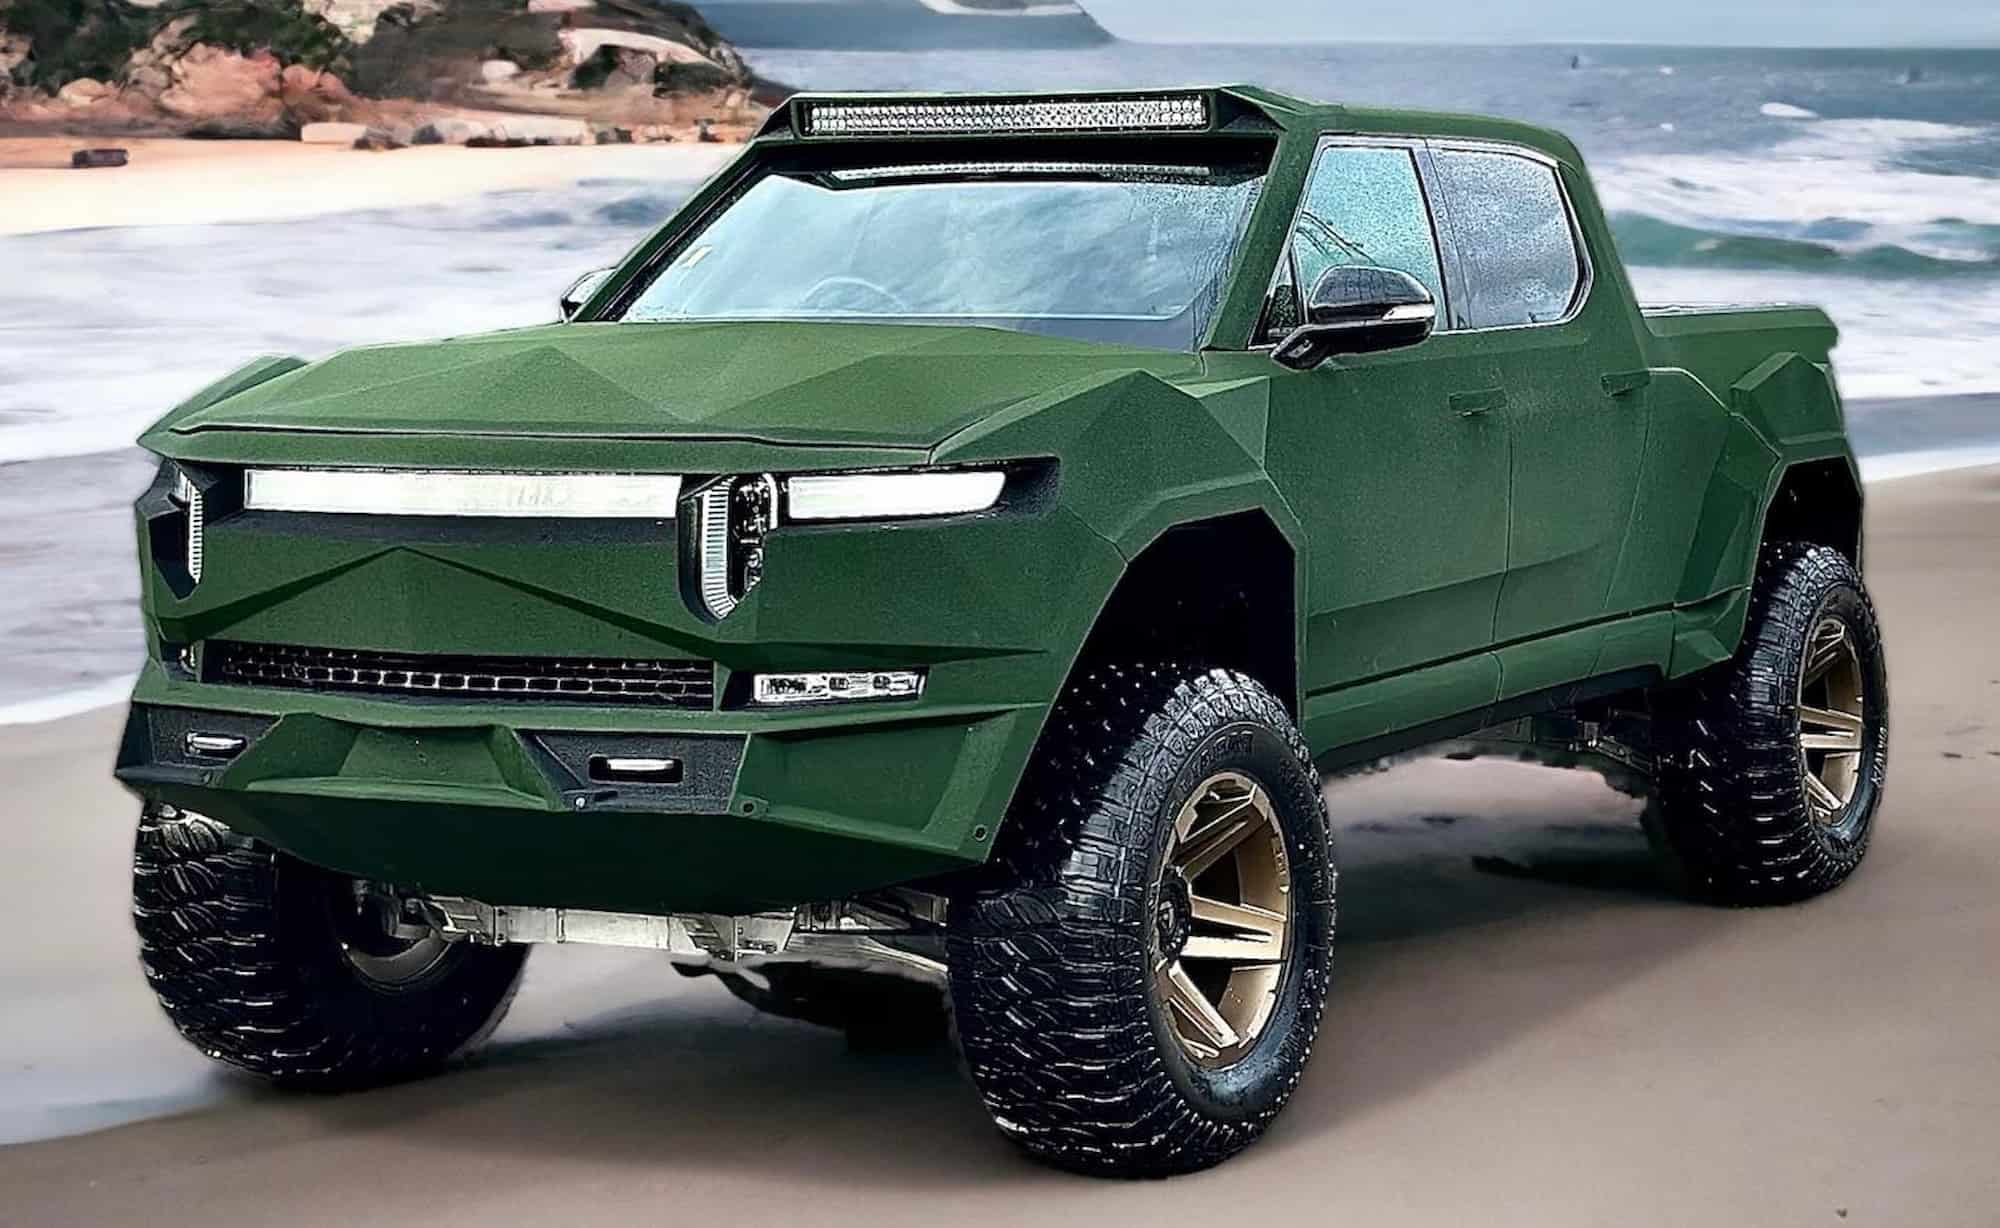 meet the apocalypse nirvana a rad rivian r1t on steroids claiming some outrageous numbers 5